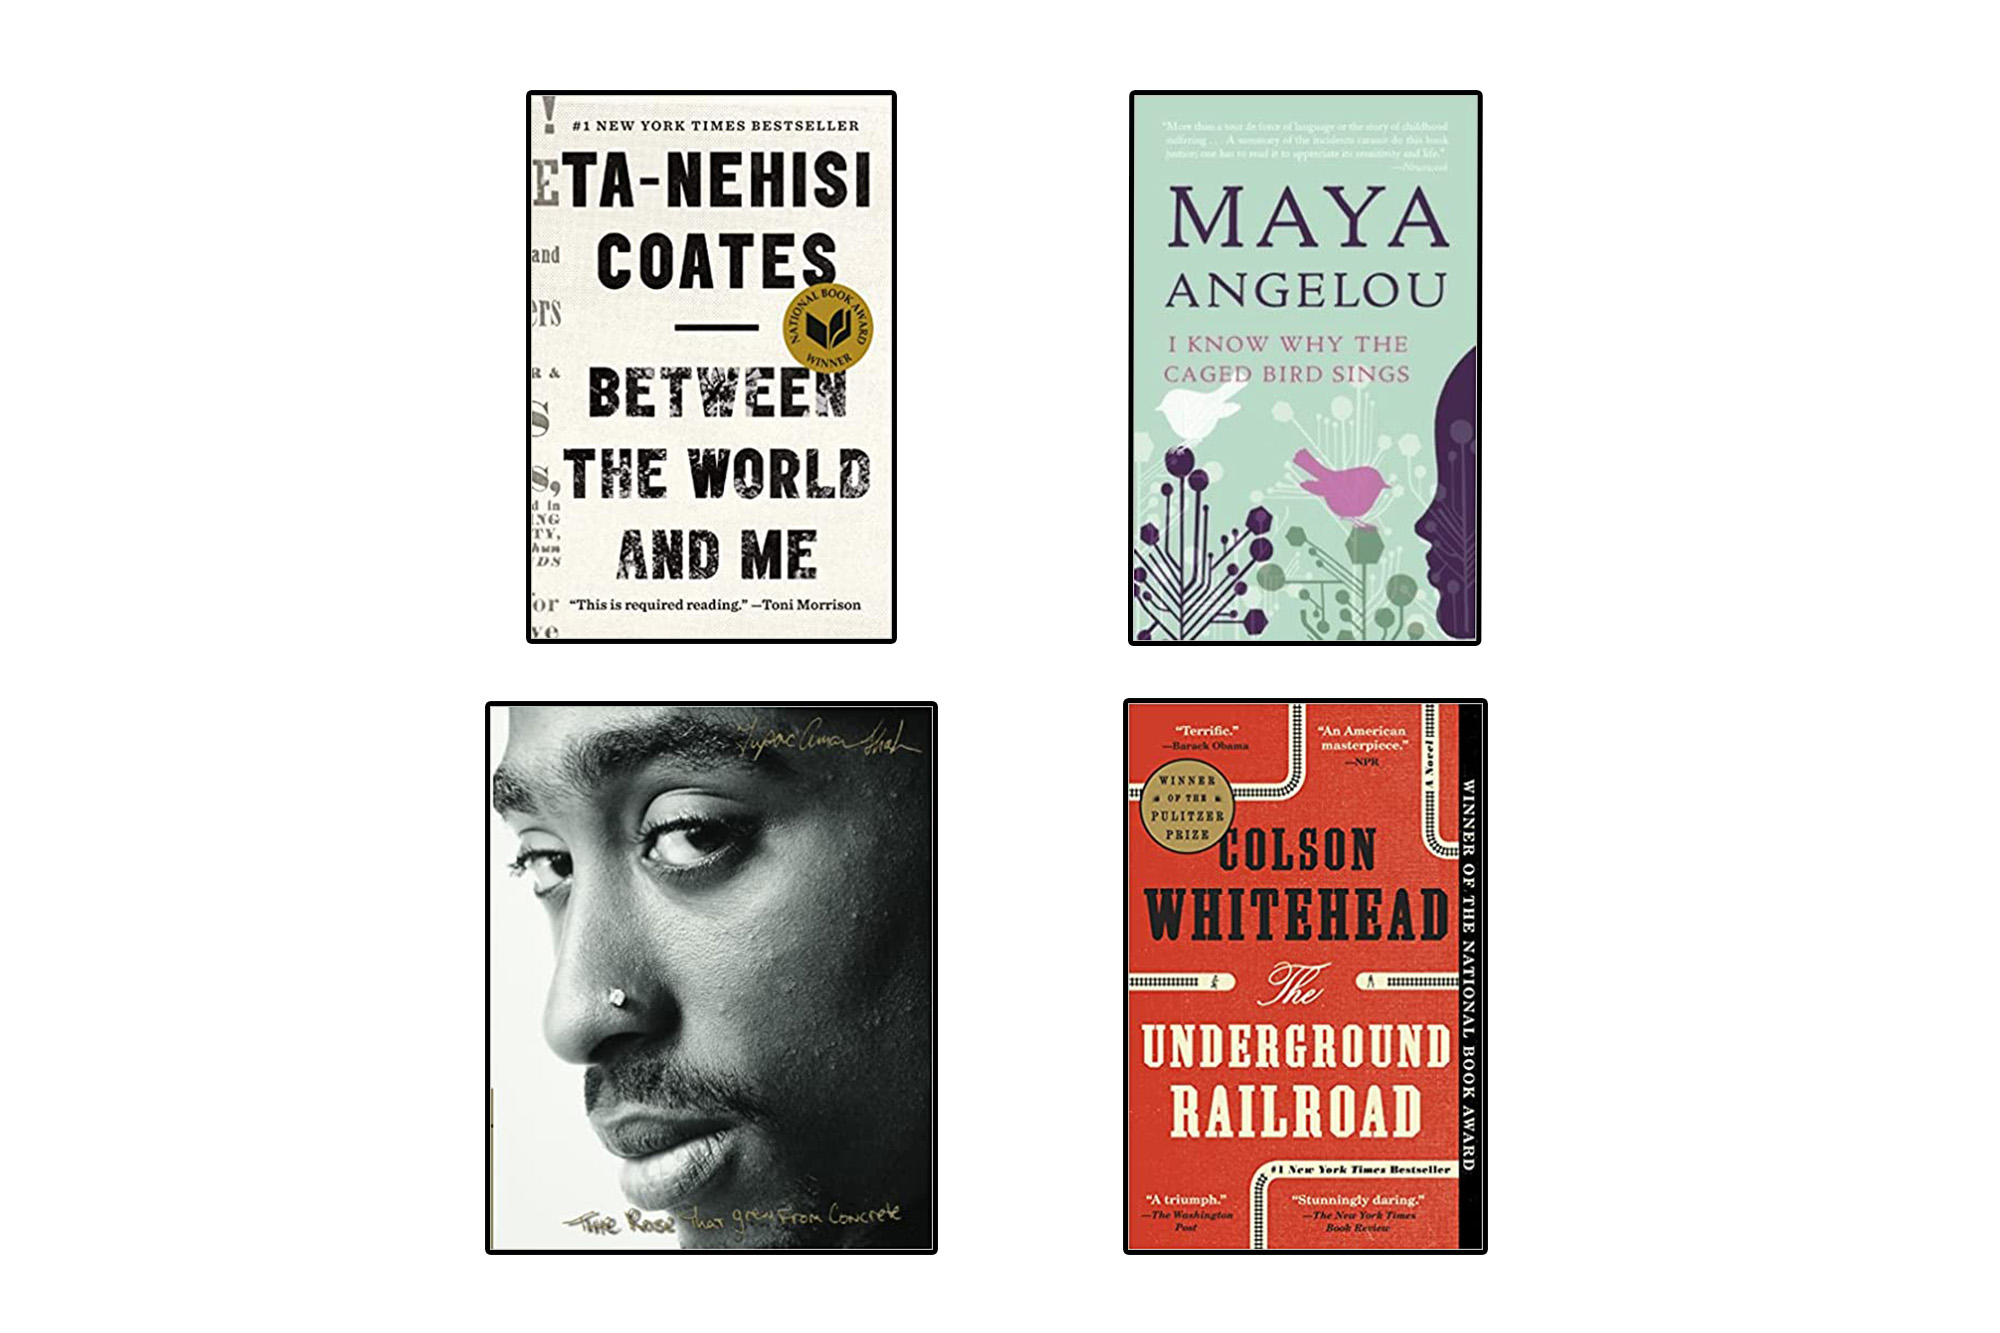 Covers of the four books linked to in the post.